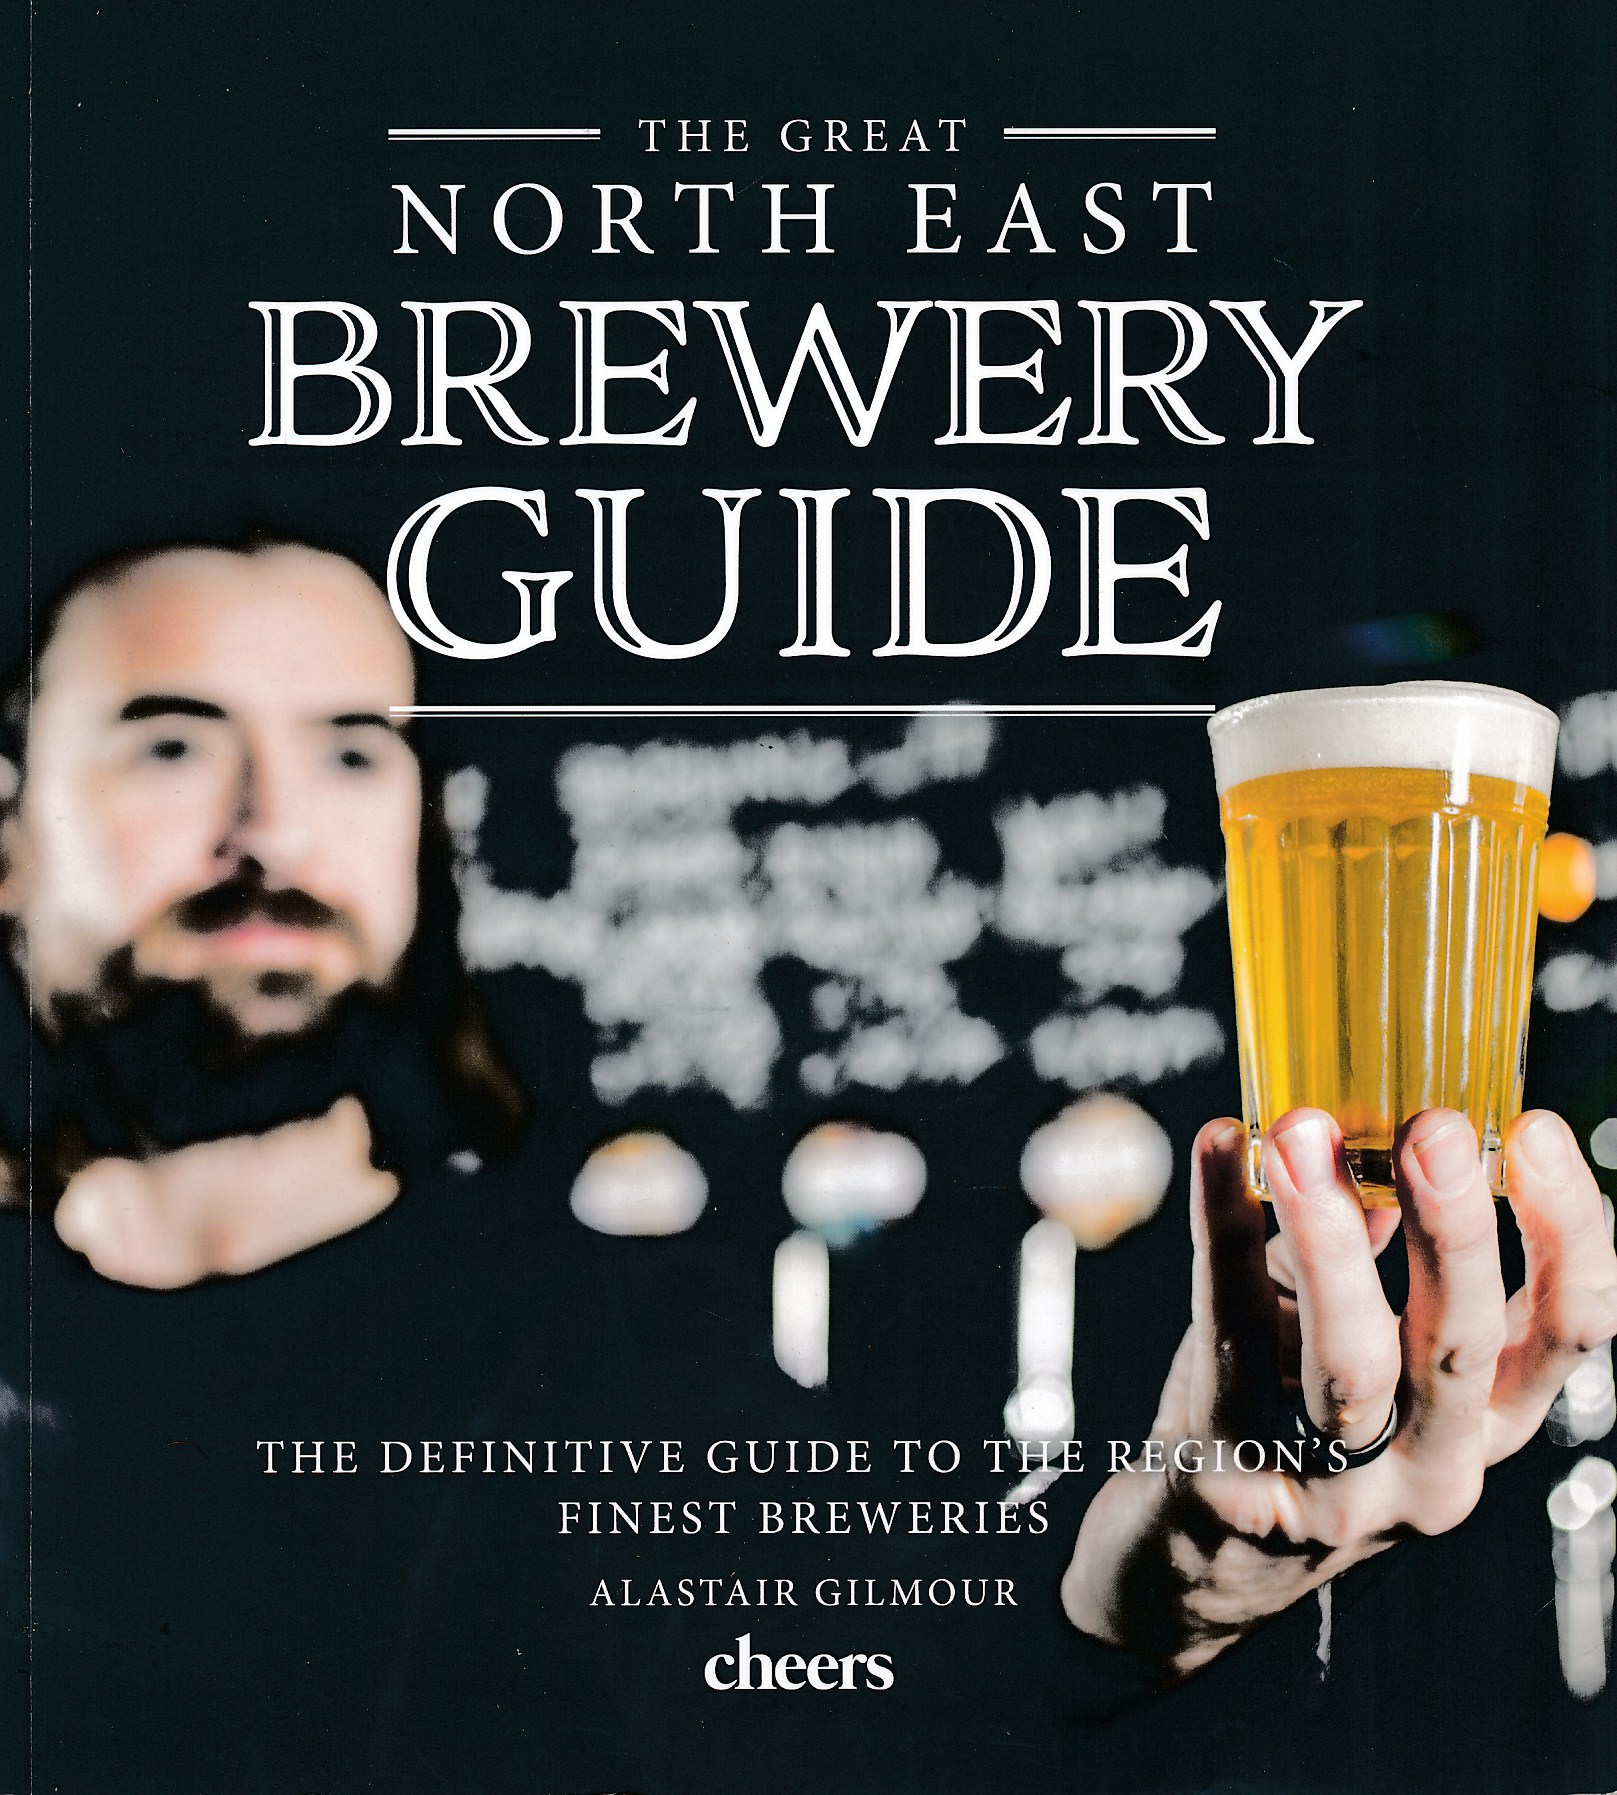 The Great North East Brewery Guide